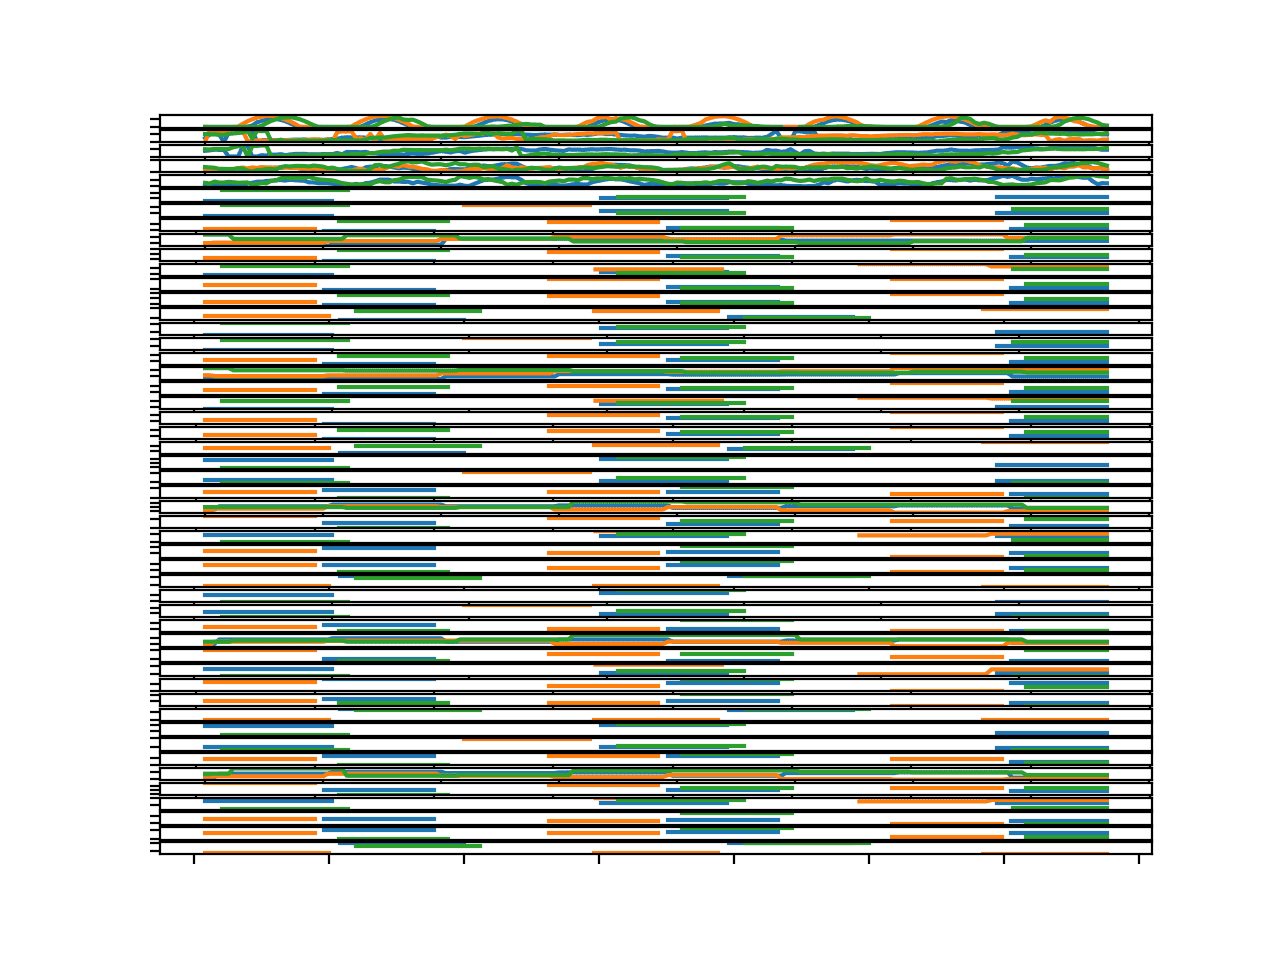 Parallel Time Series Line Plots For All Input Variables for 3 Chunks